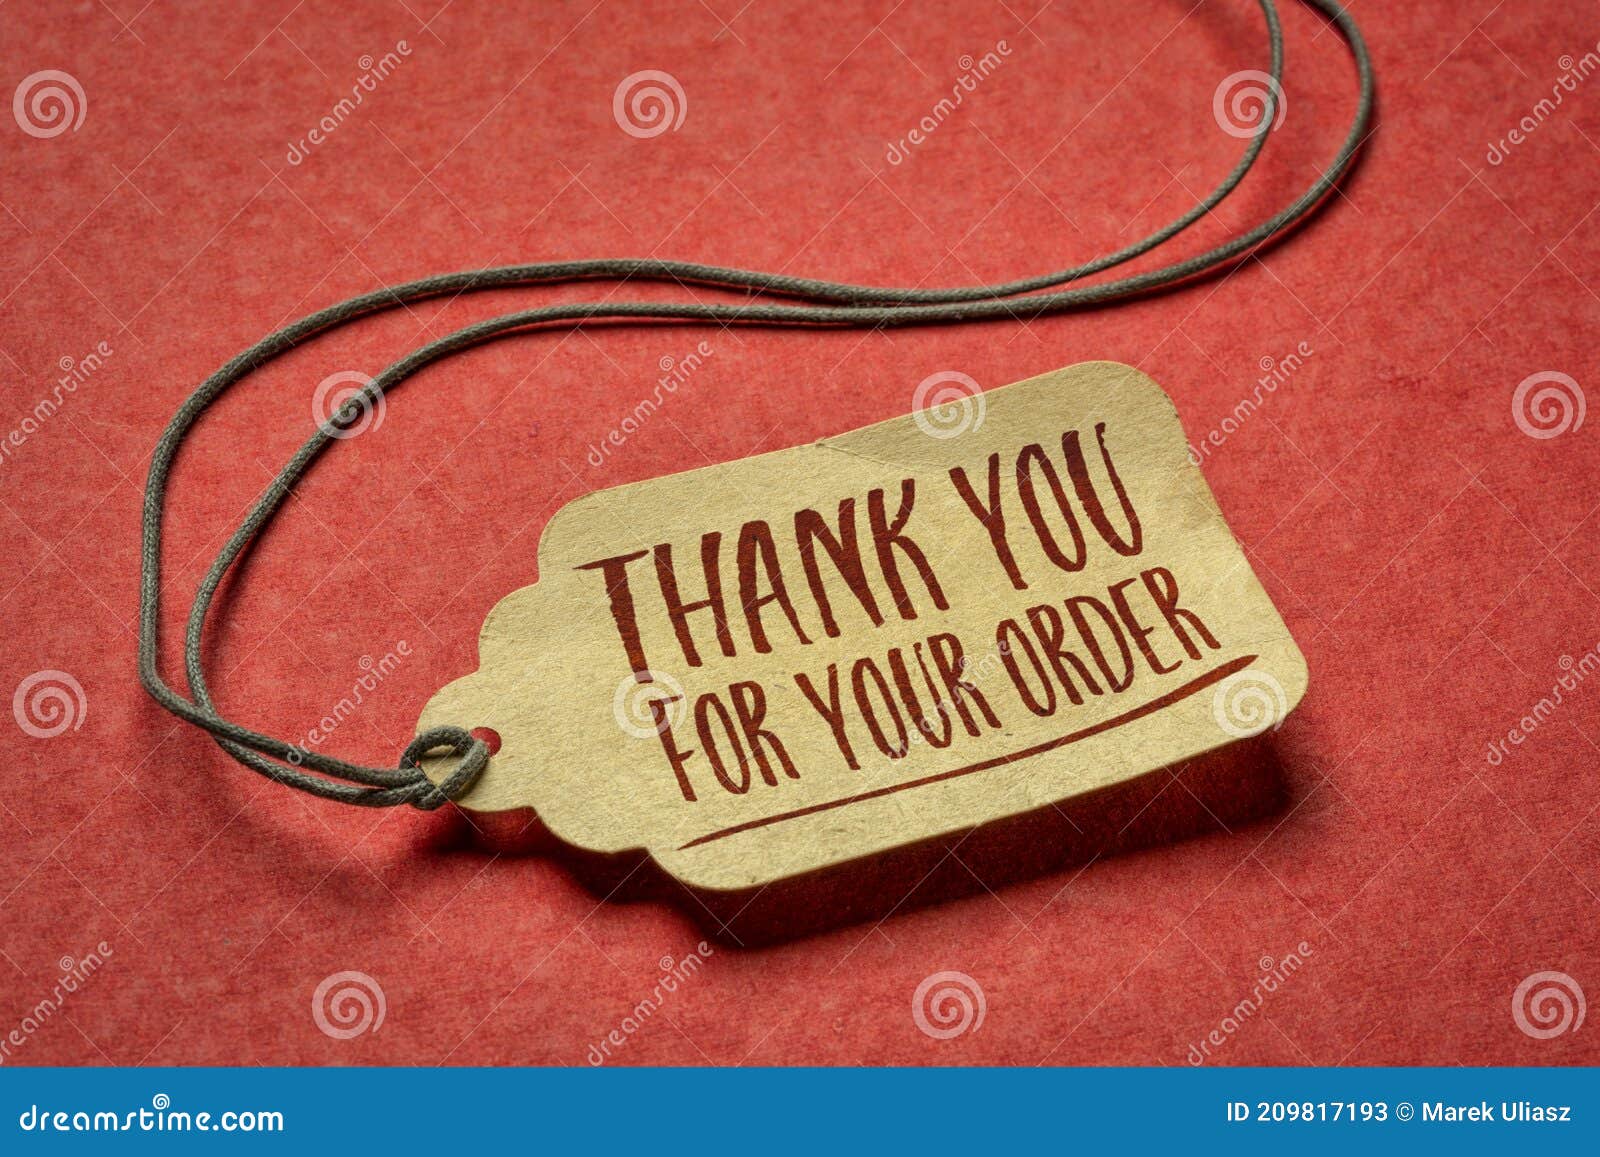 Thank You Your Order Photos Free Royalty Free Stock Photos From Dreamstime